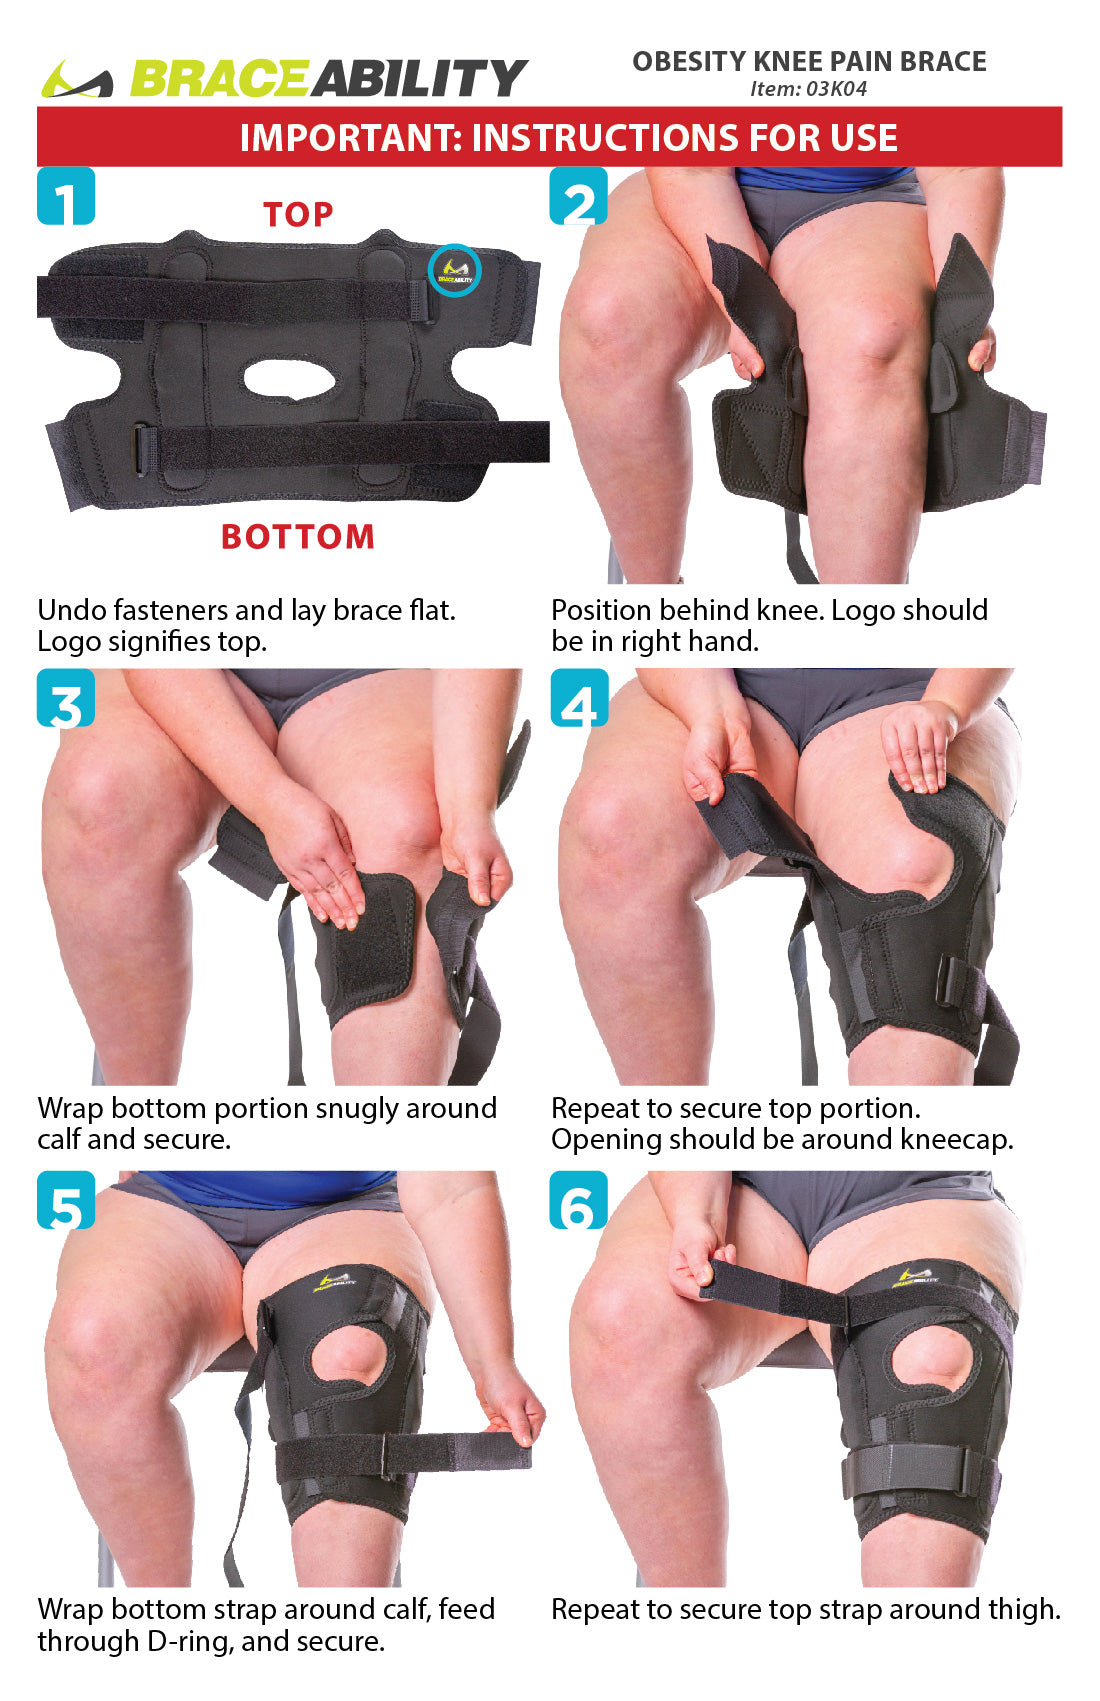 To apply this plus size knee brace follow these 6-step on the instruction sheet